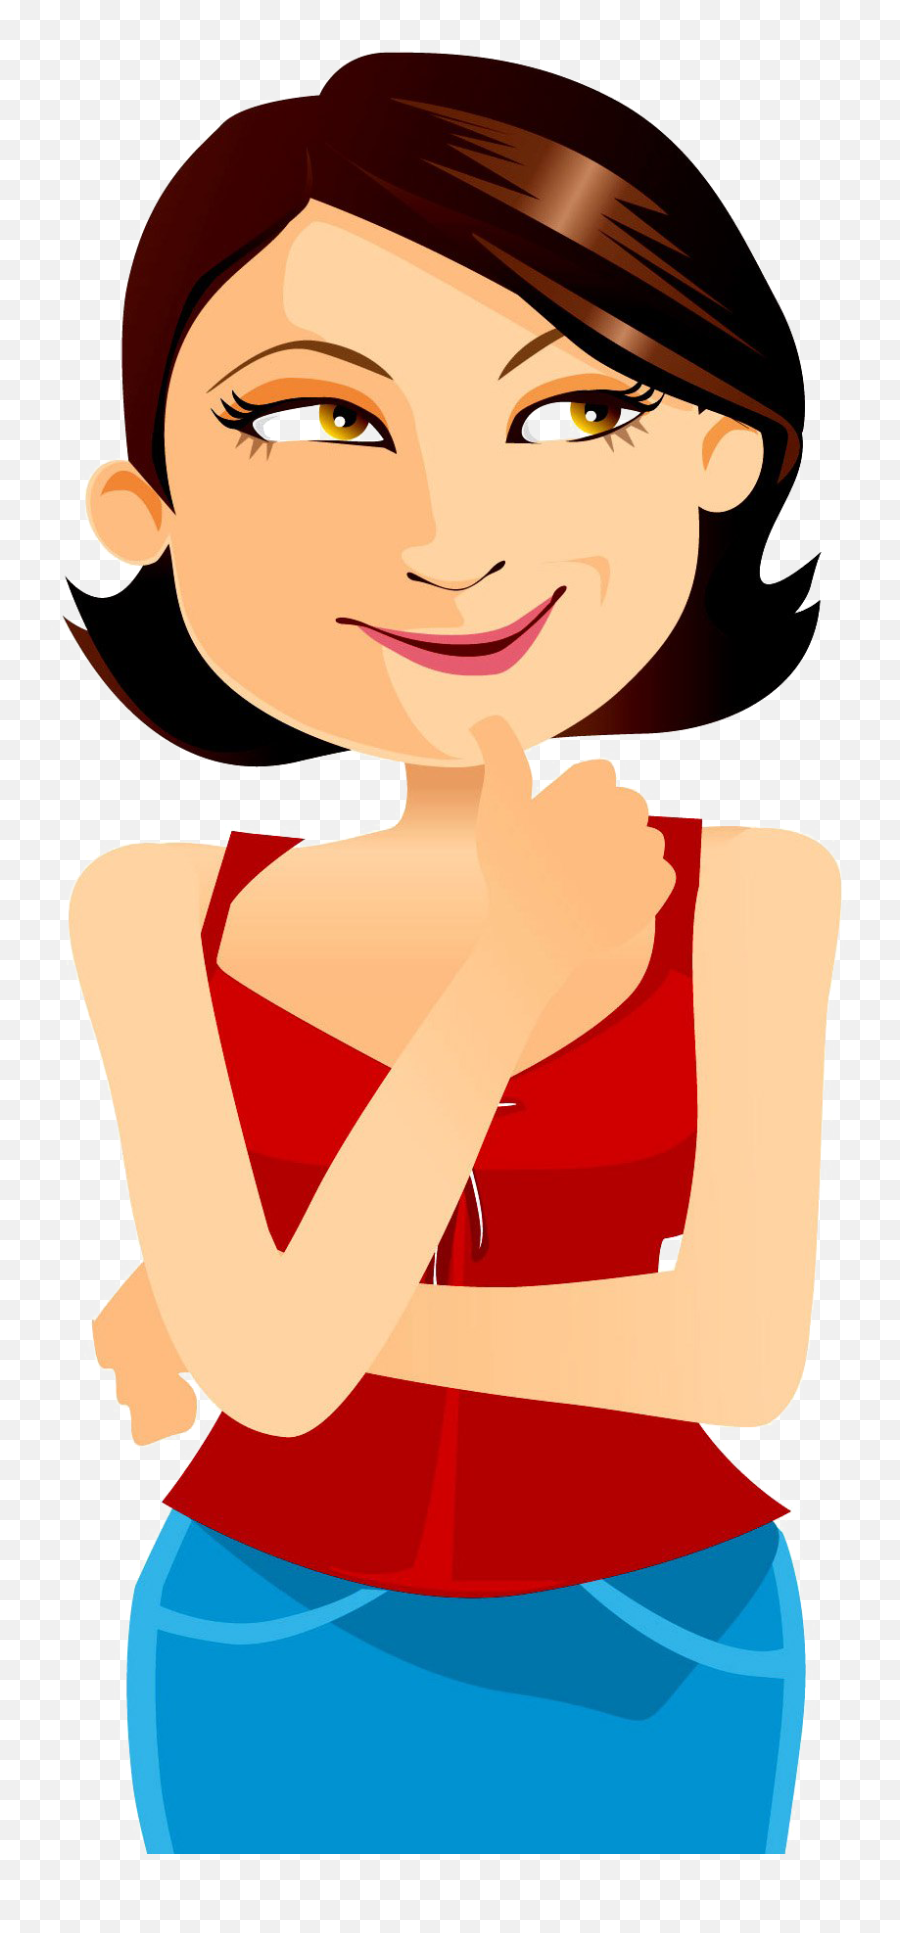 Thinking Woman Png Image Free Download - Portable Network Graphics Emoji,Woman Png